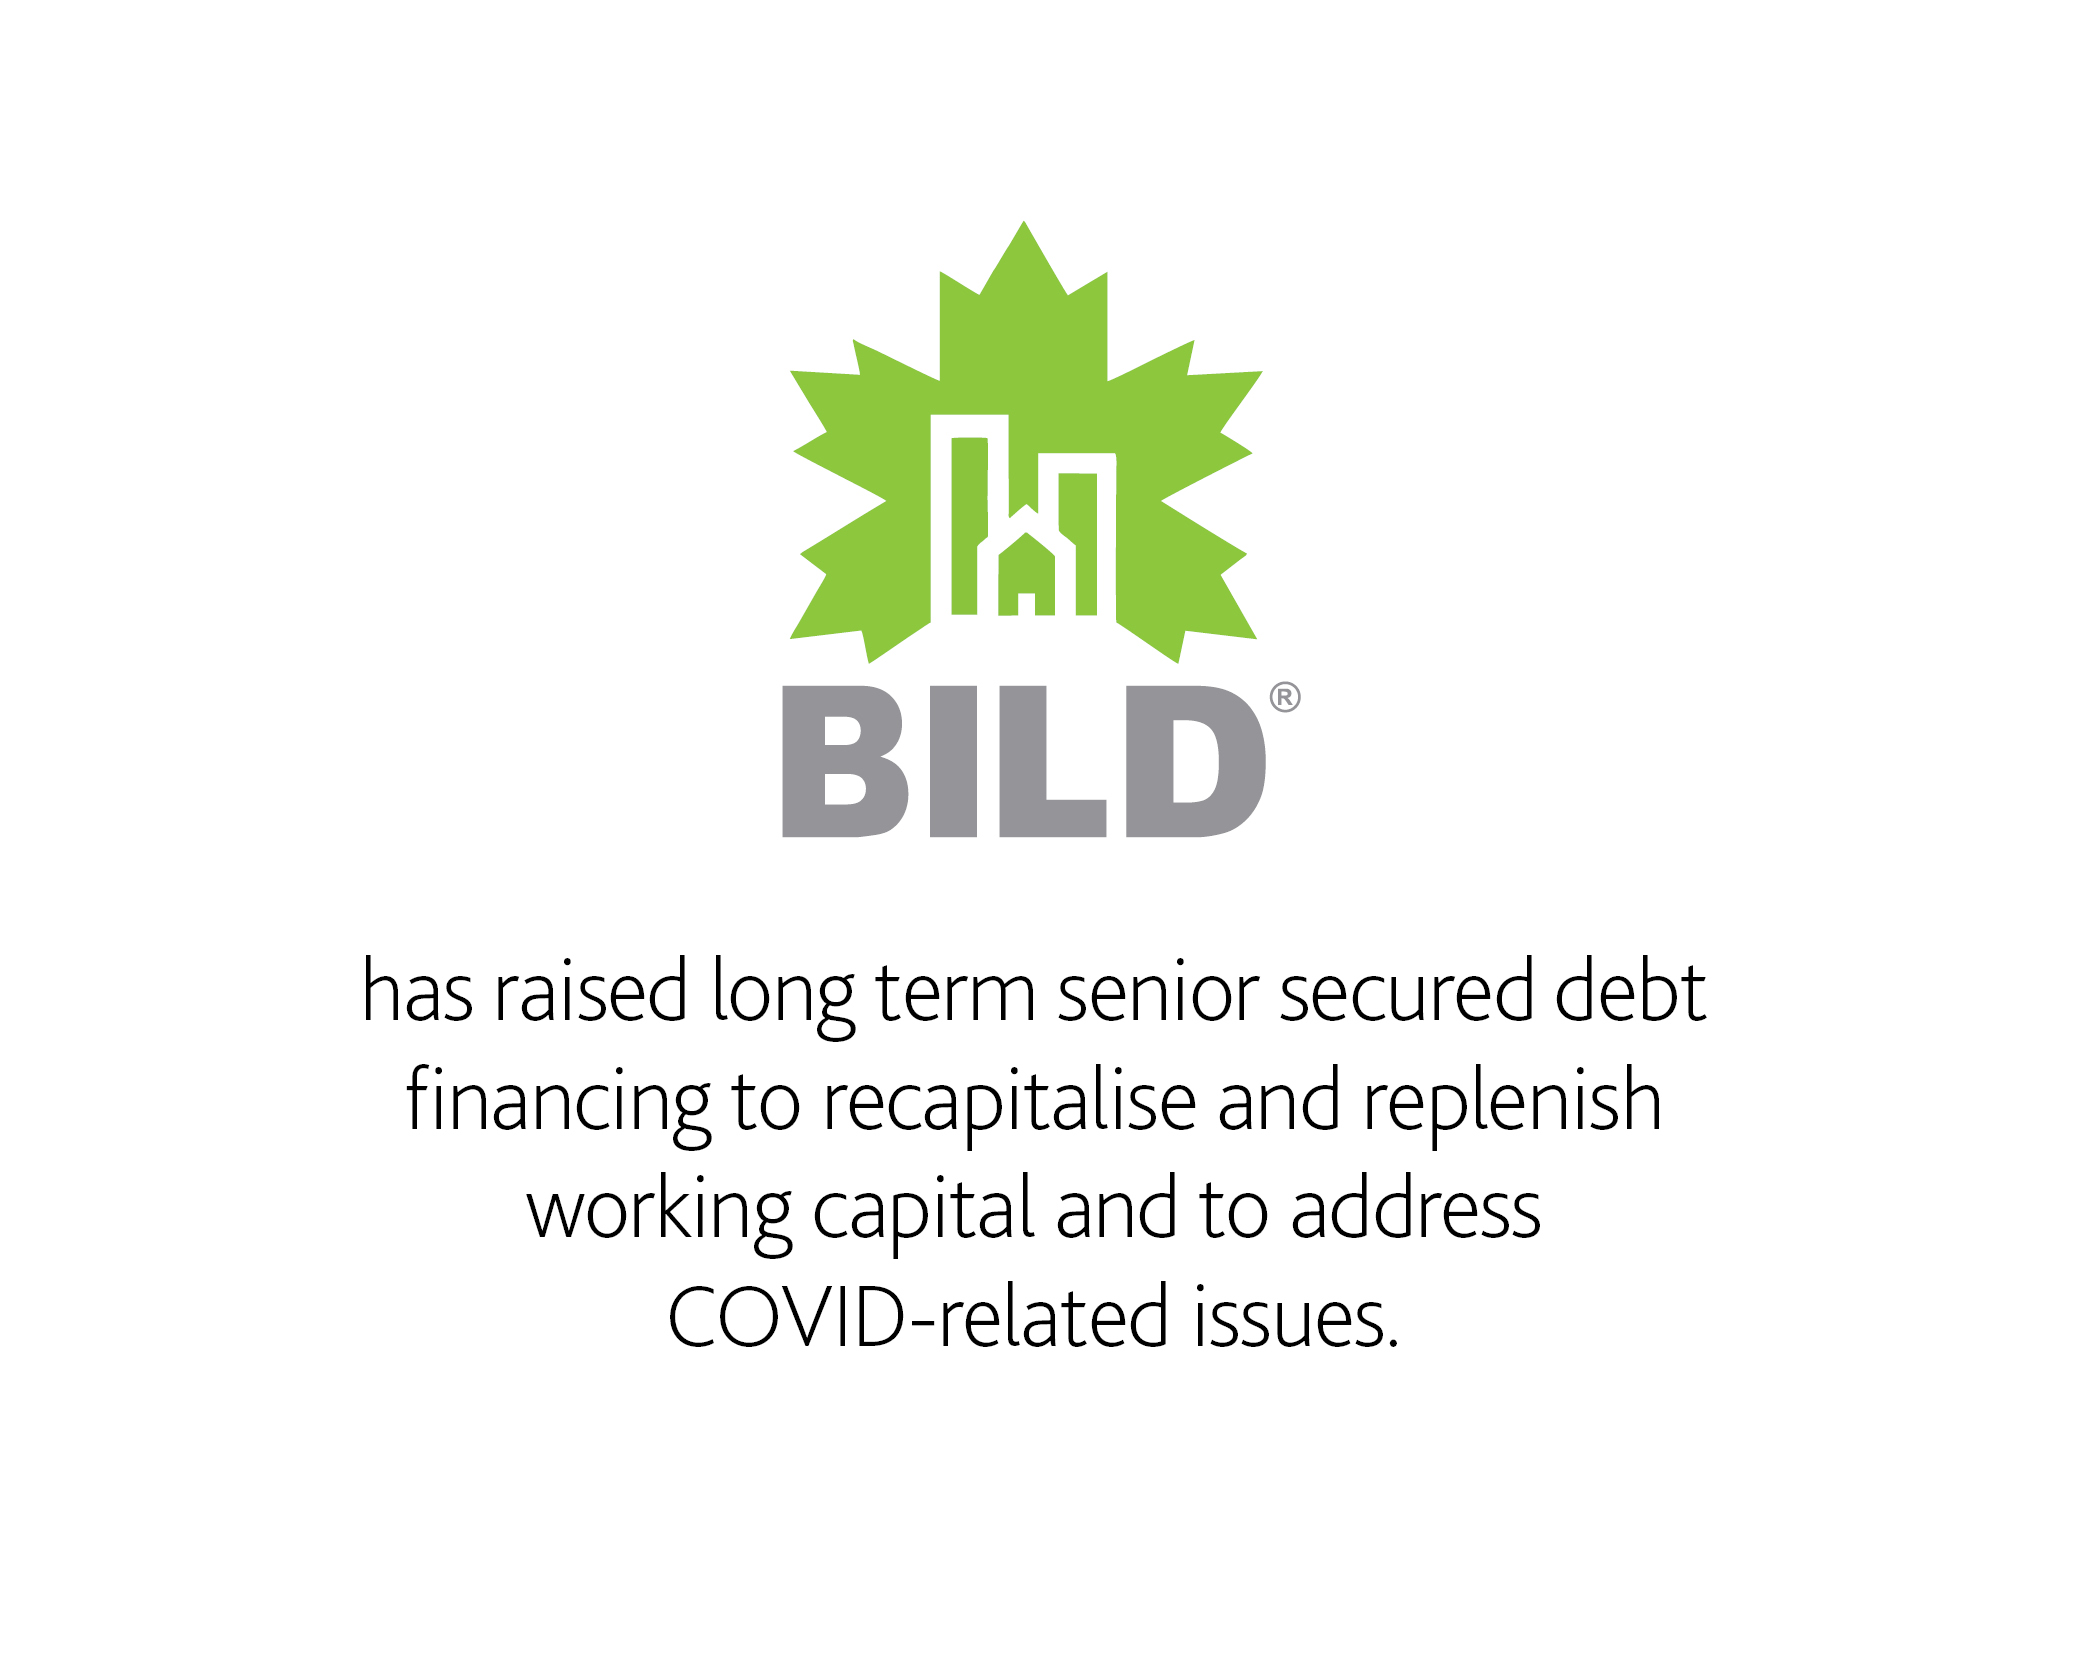 BILD has raised long term senior secured debt financing to recapitalise and replenish working capital and to address COVID-related issues 